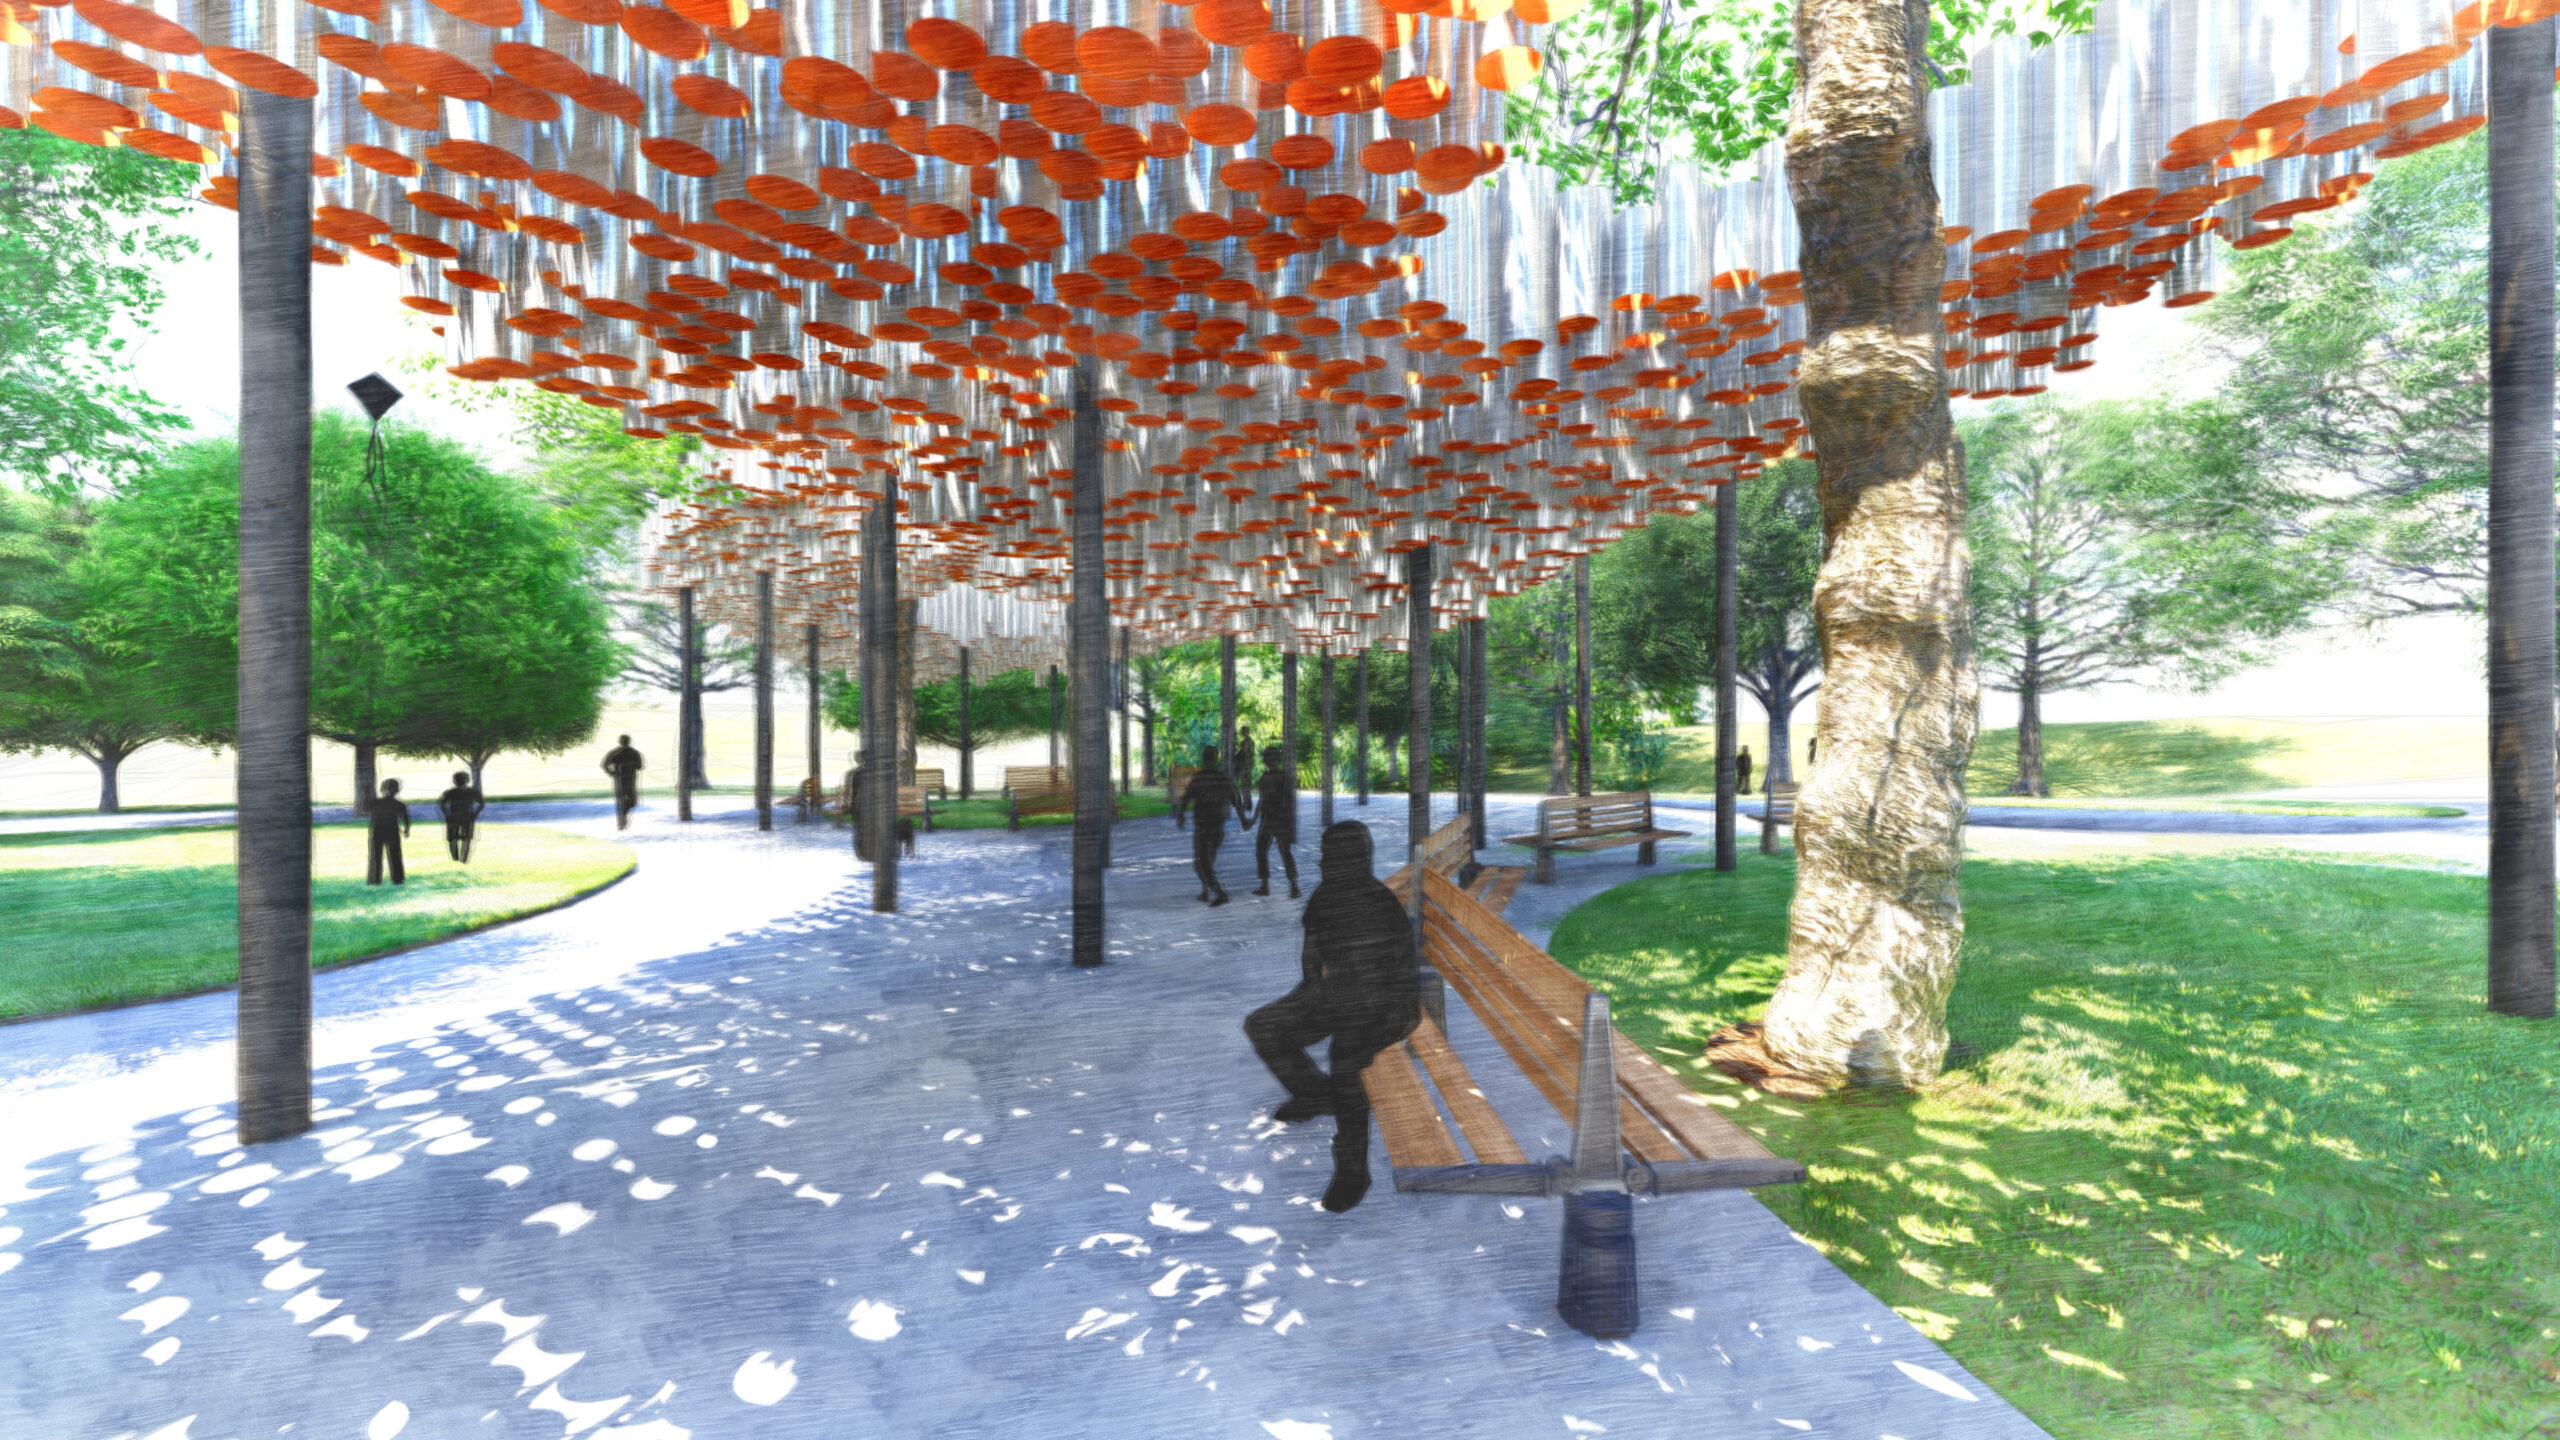 Rendering of people sitting on benches underneath a sculptural pavilion structure.